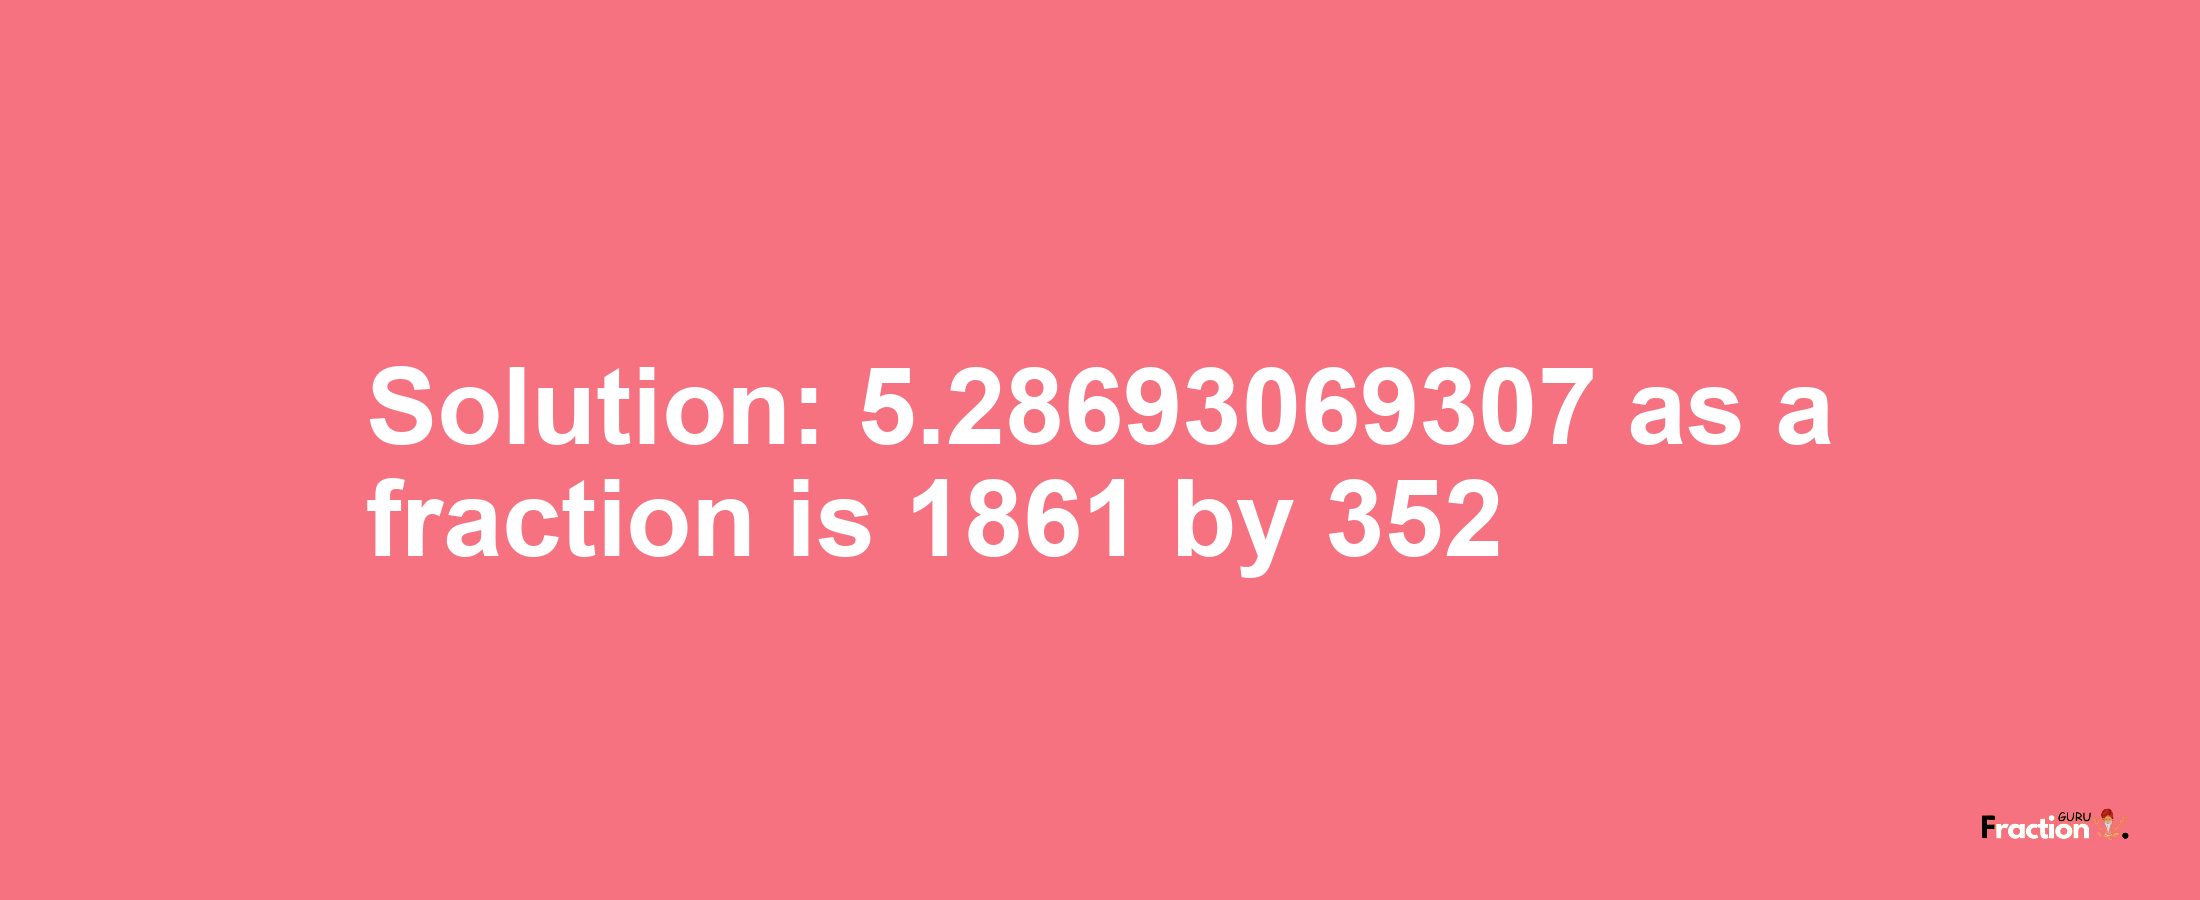 Solution:5.28693069307 as a fraction is 1861/352